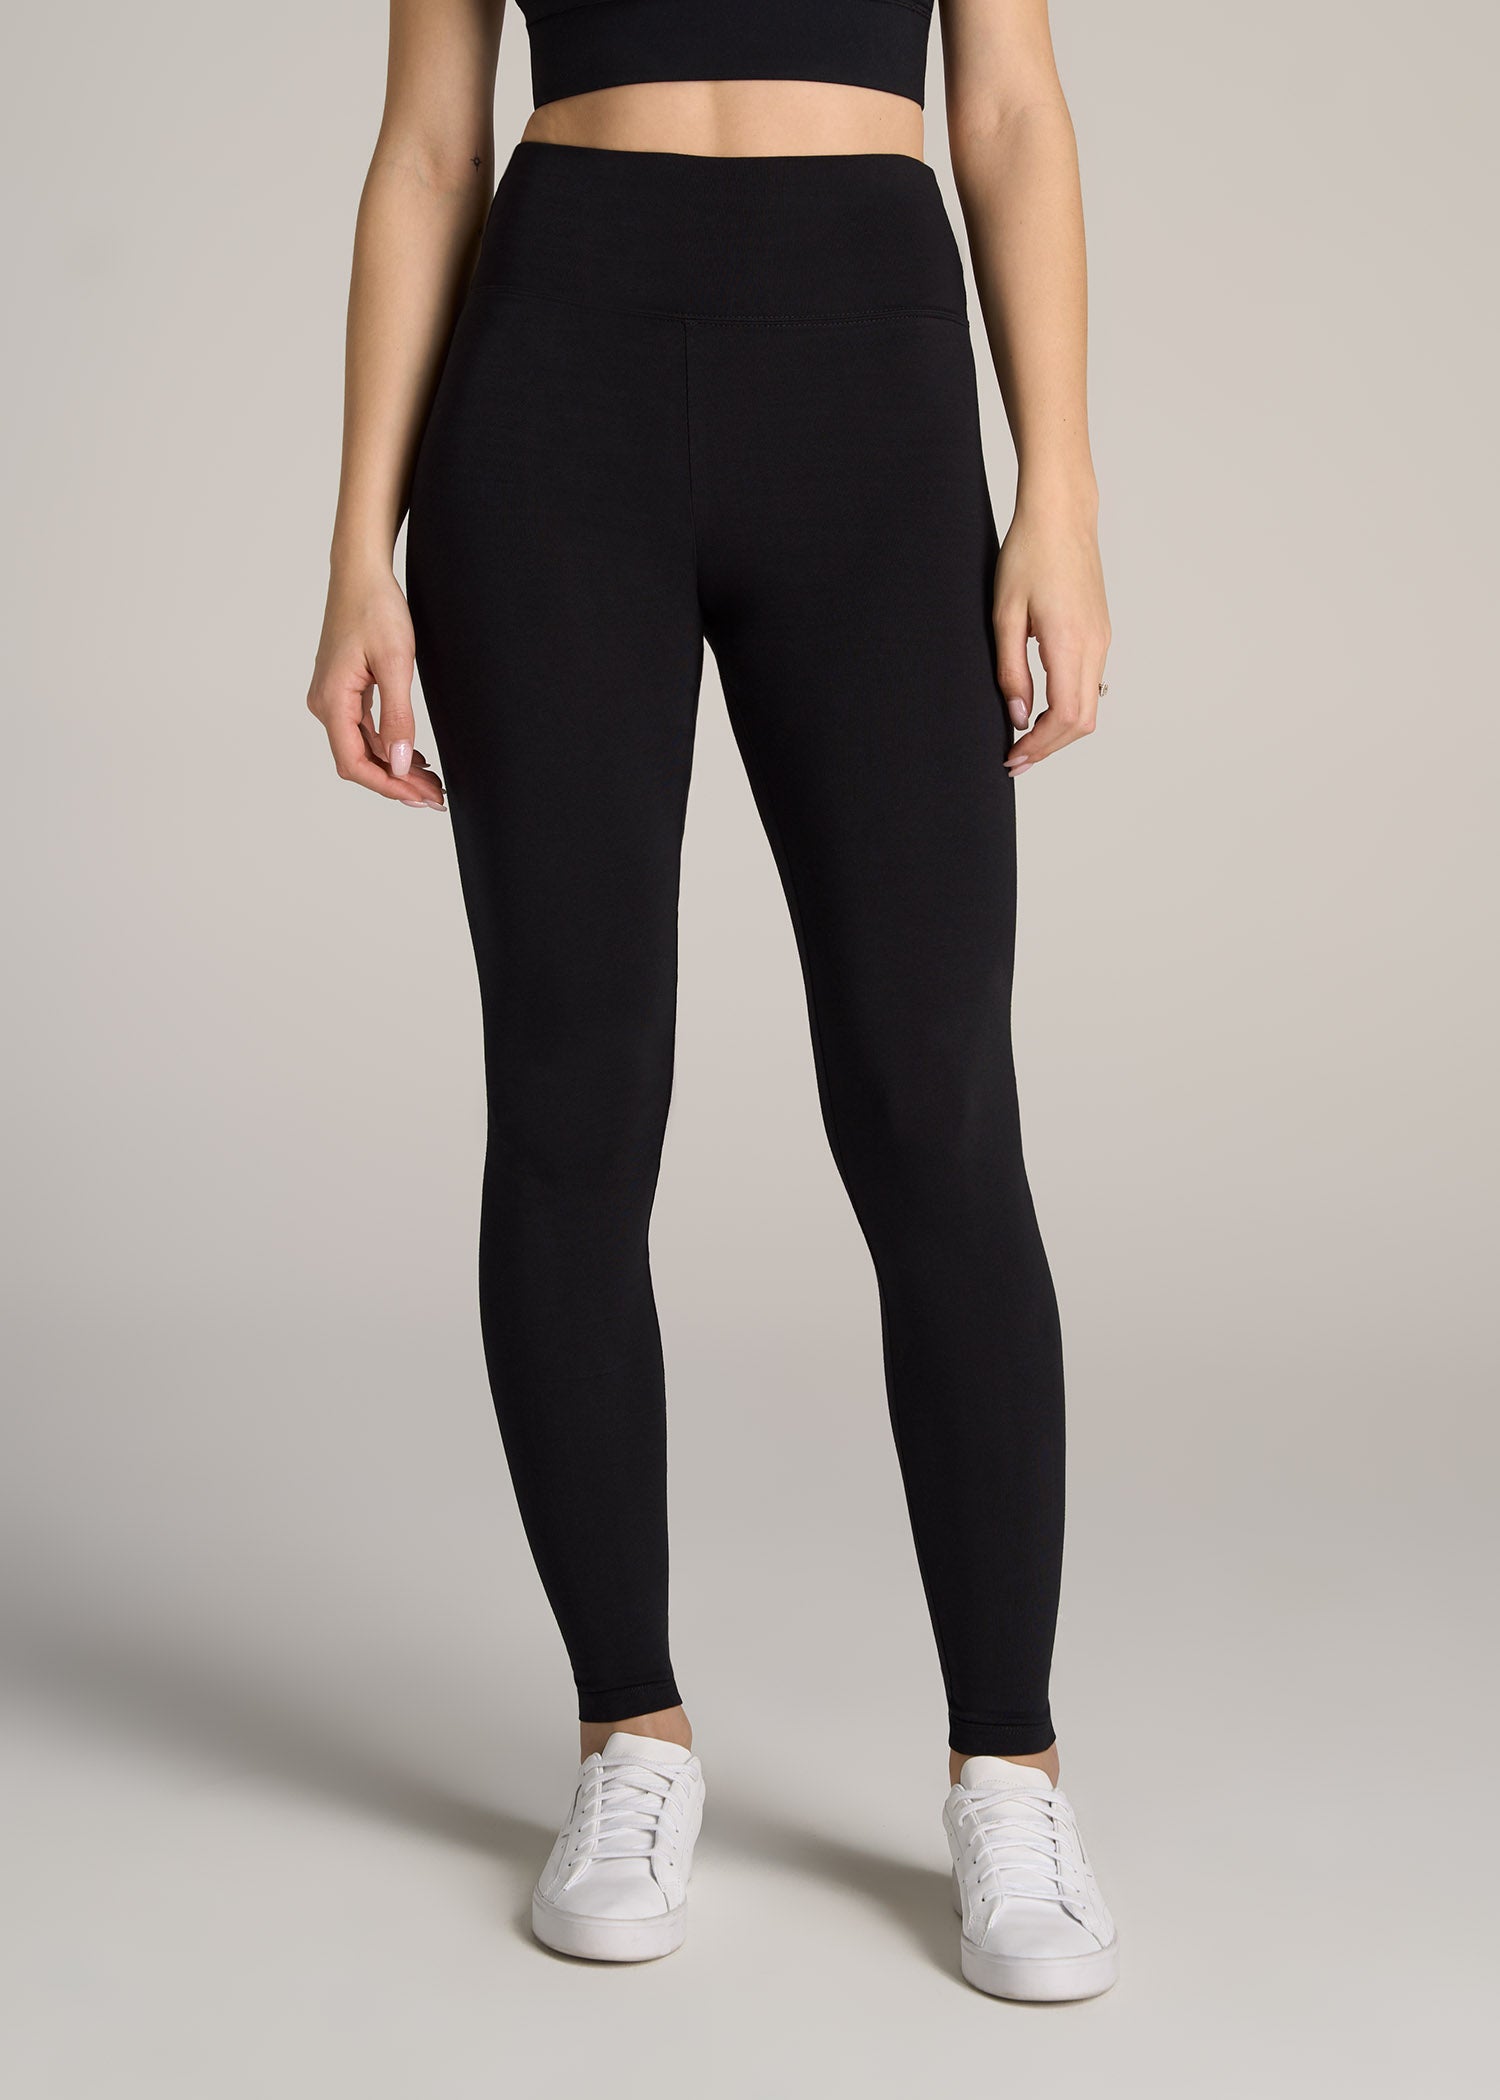 Womens Burberry black Wool-Blend Check Tights | Harrods # {CountryCode}